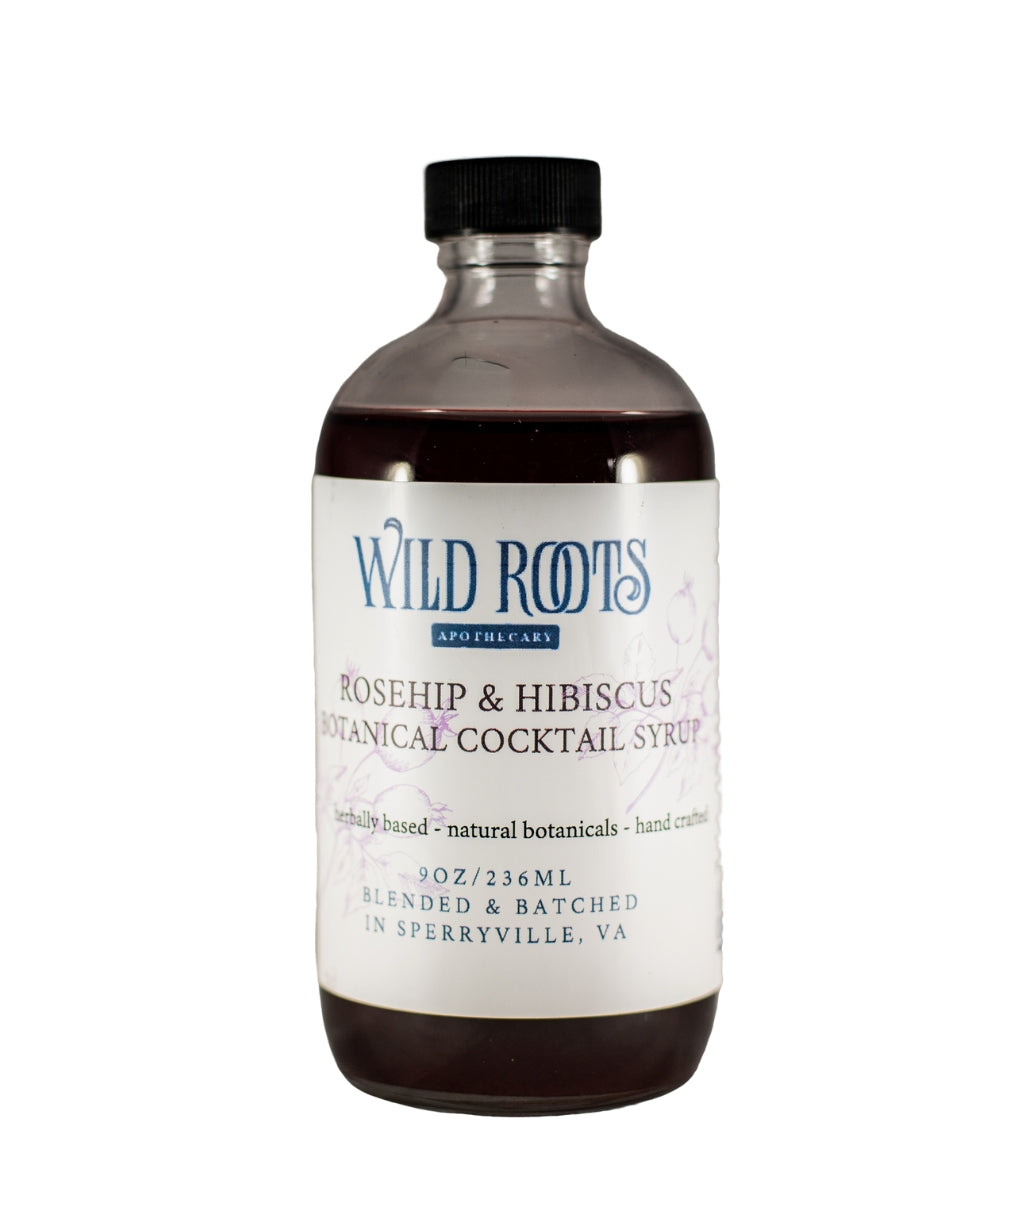 Rosehip Hibiscus Botanical Syrup—Wild Roots Apothecary